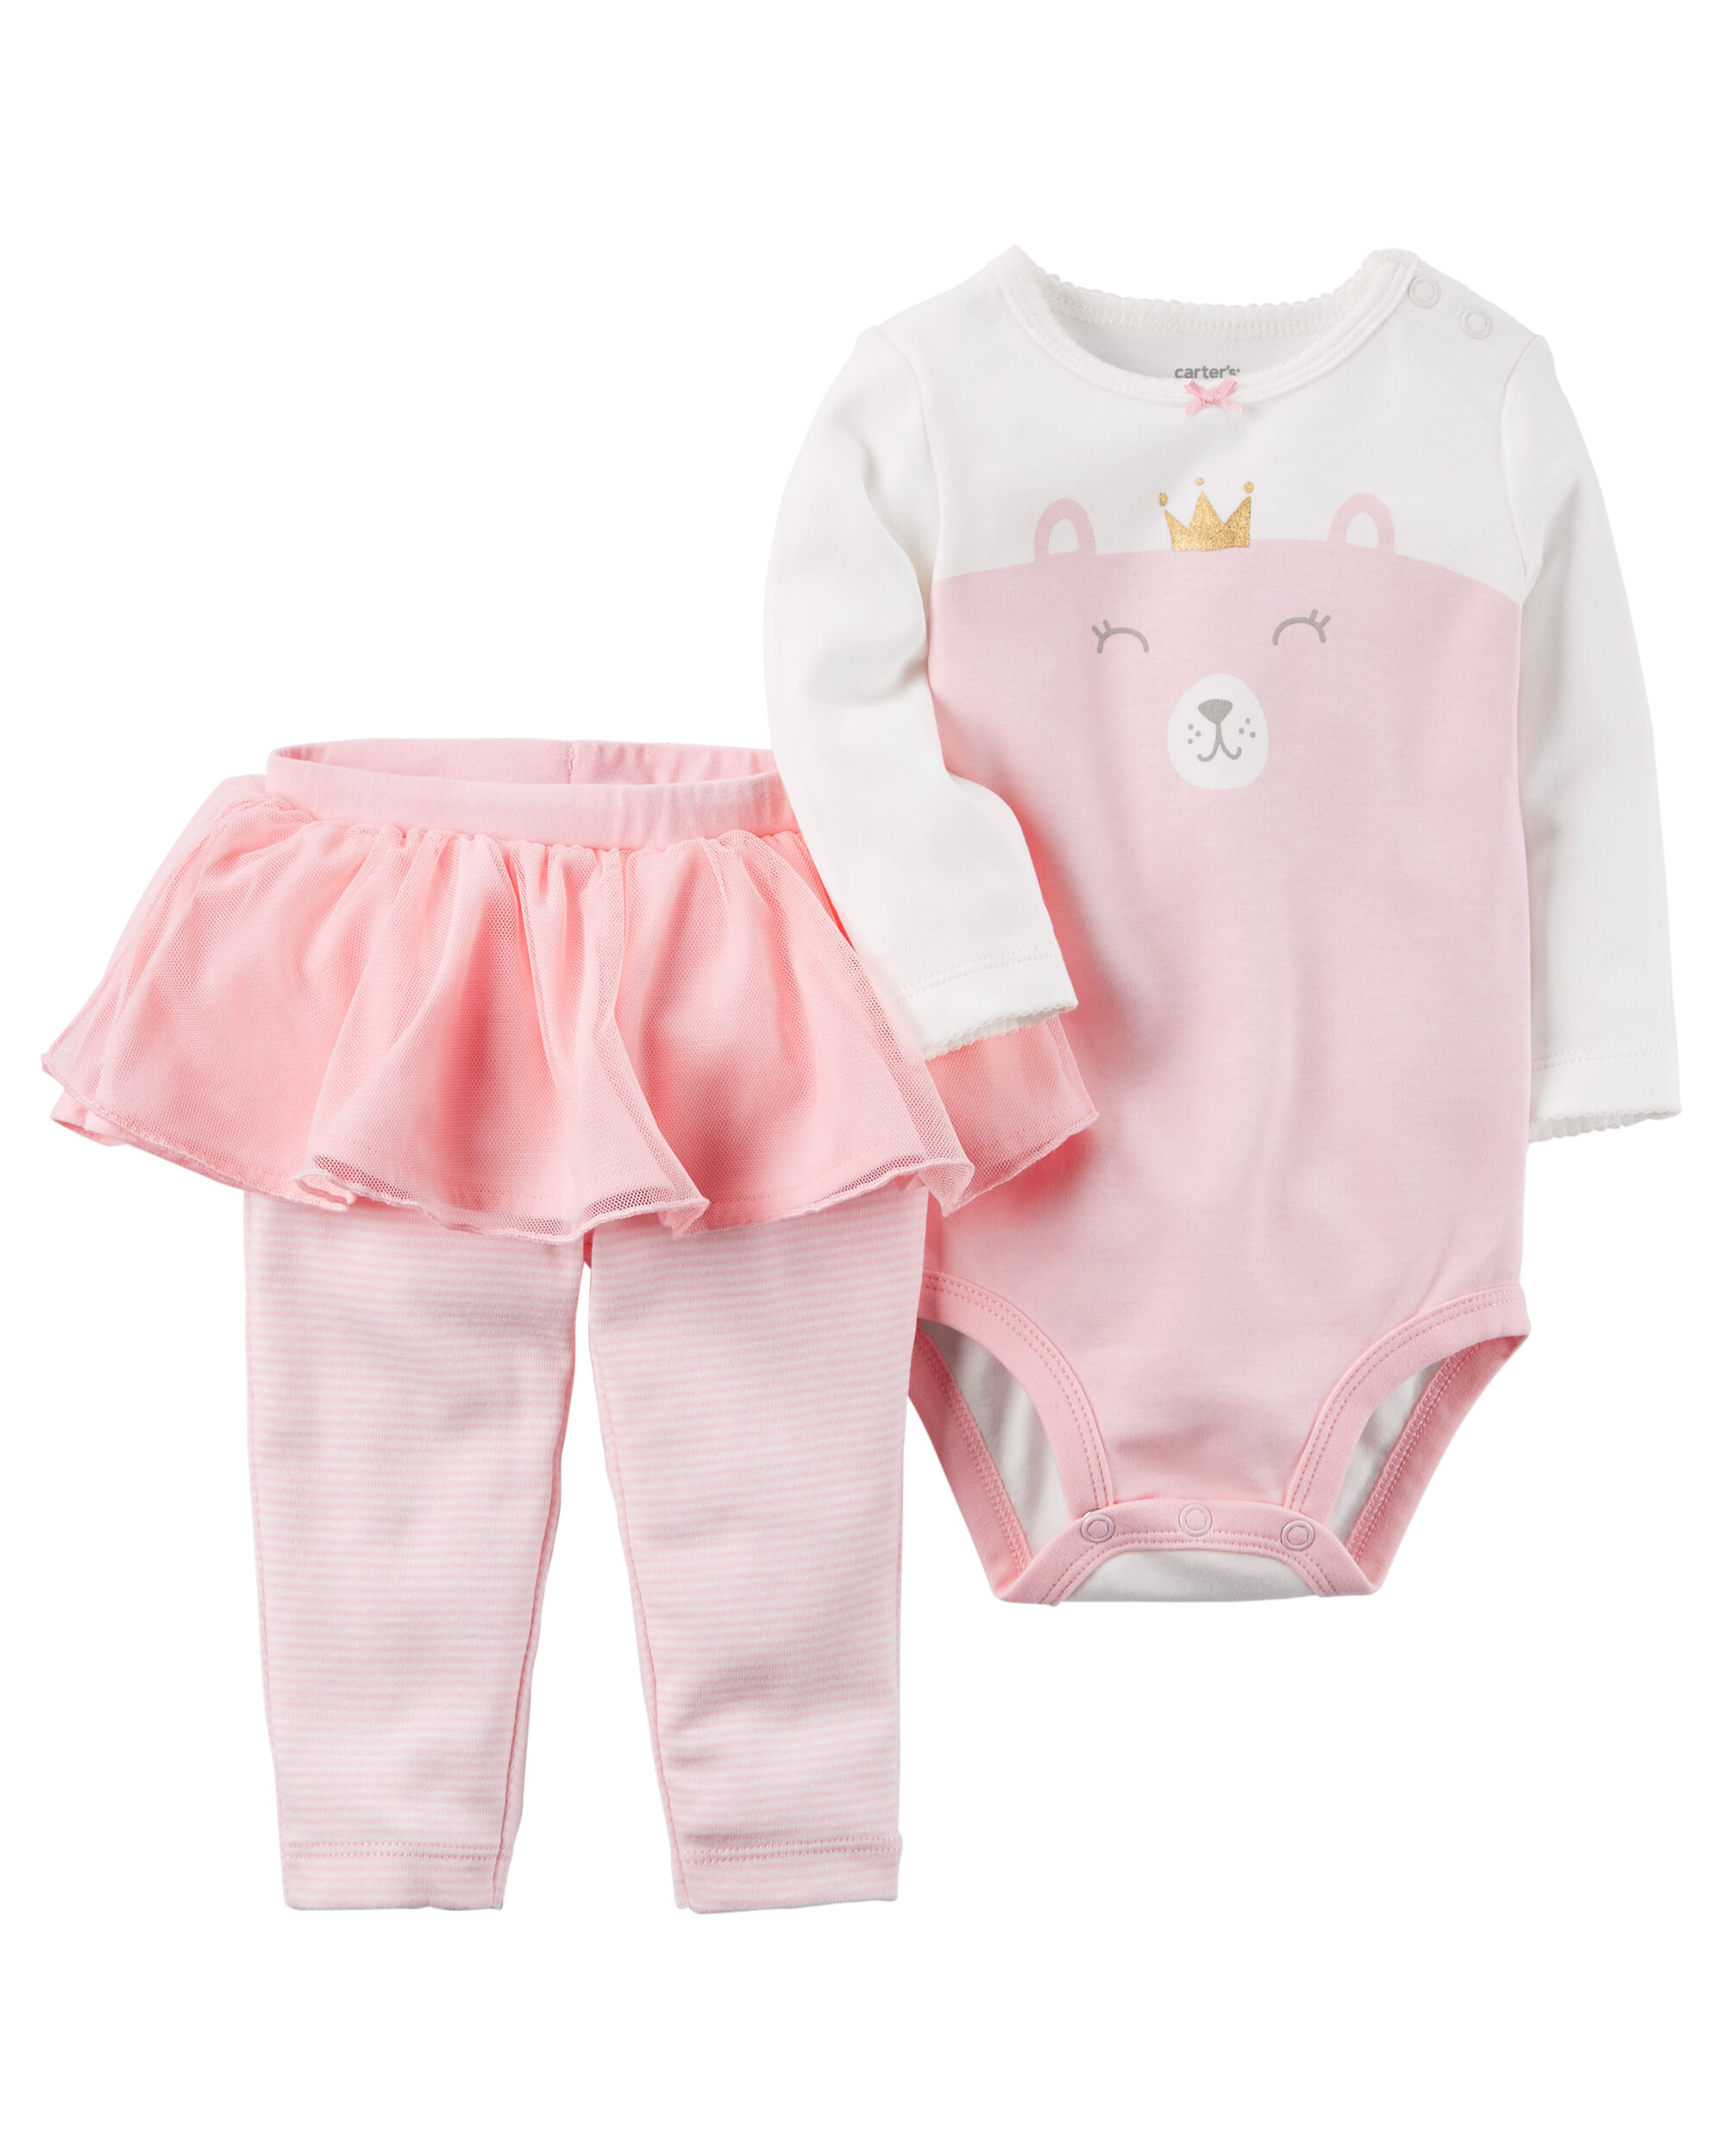 pants with tutu attached